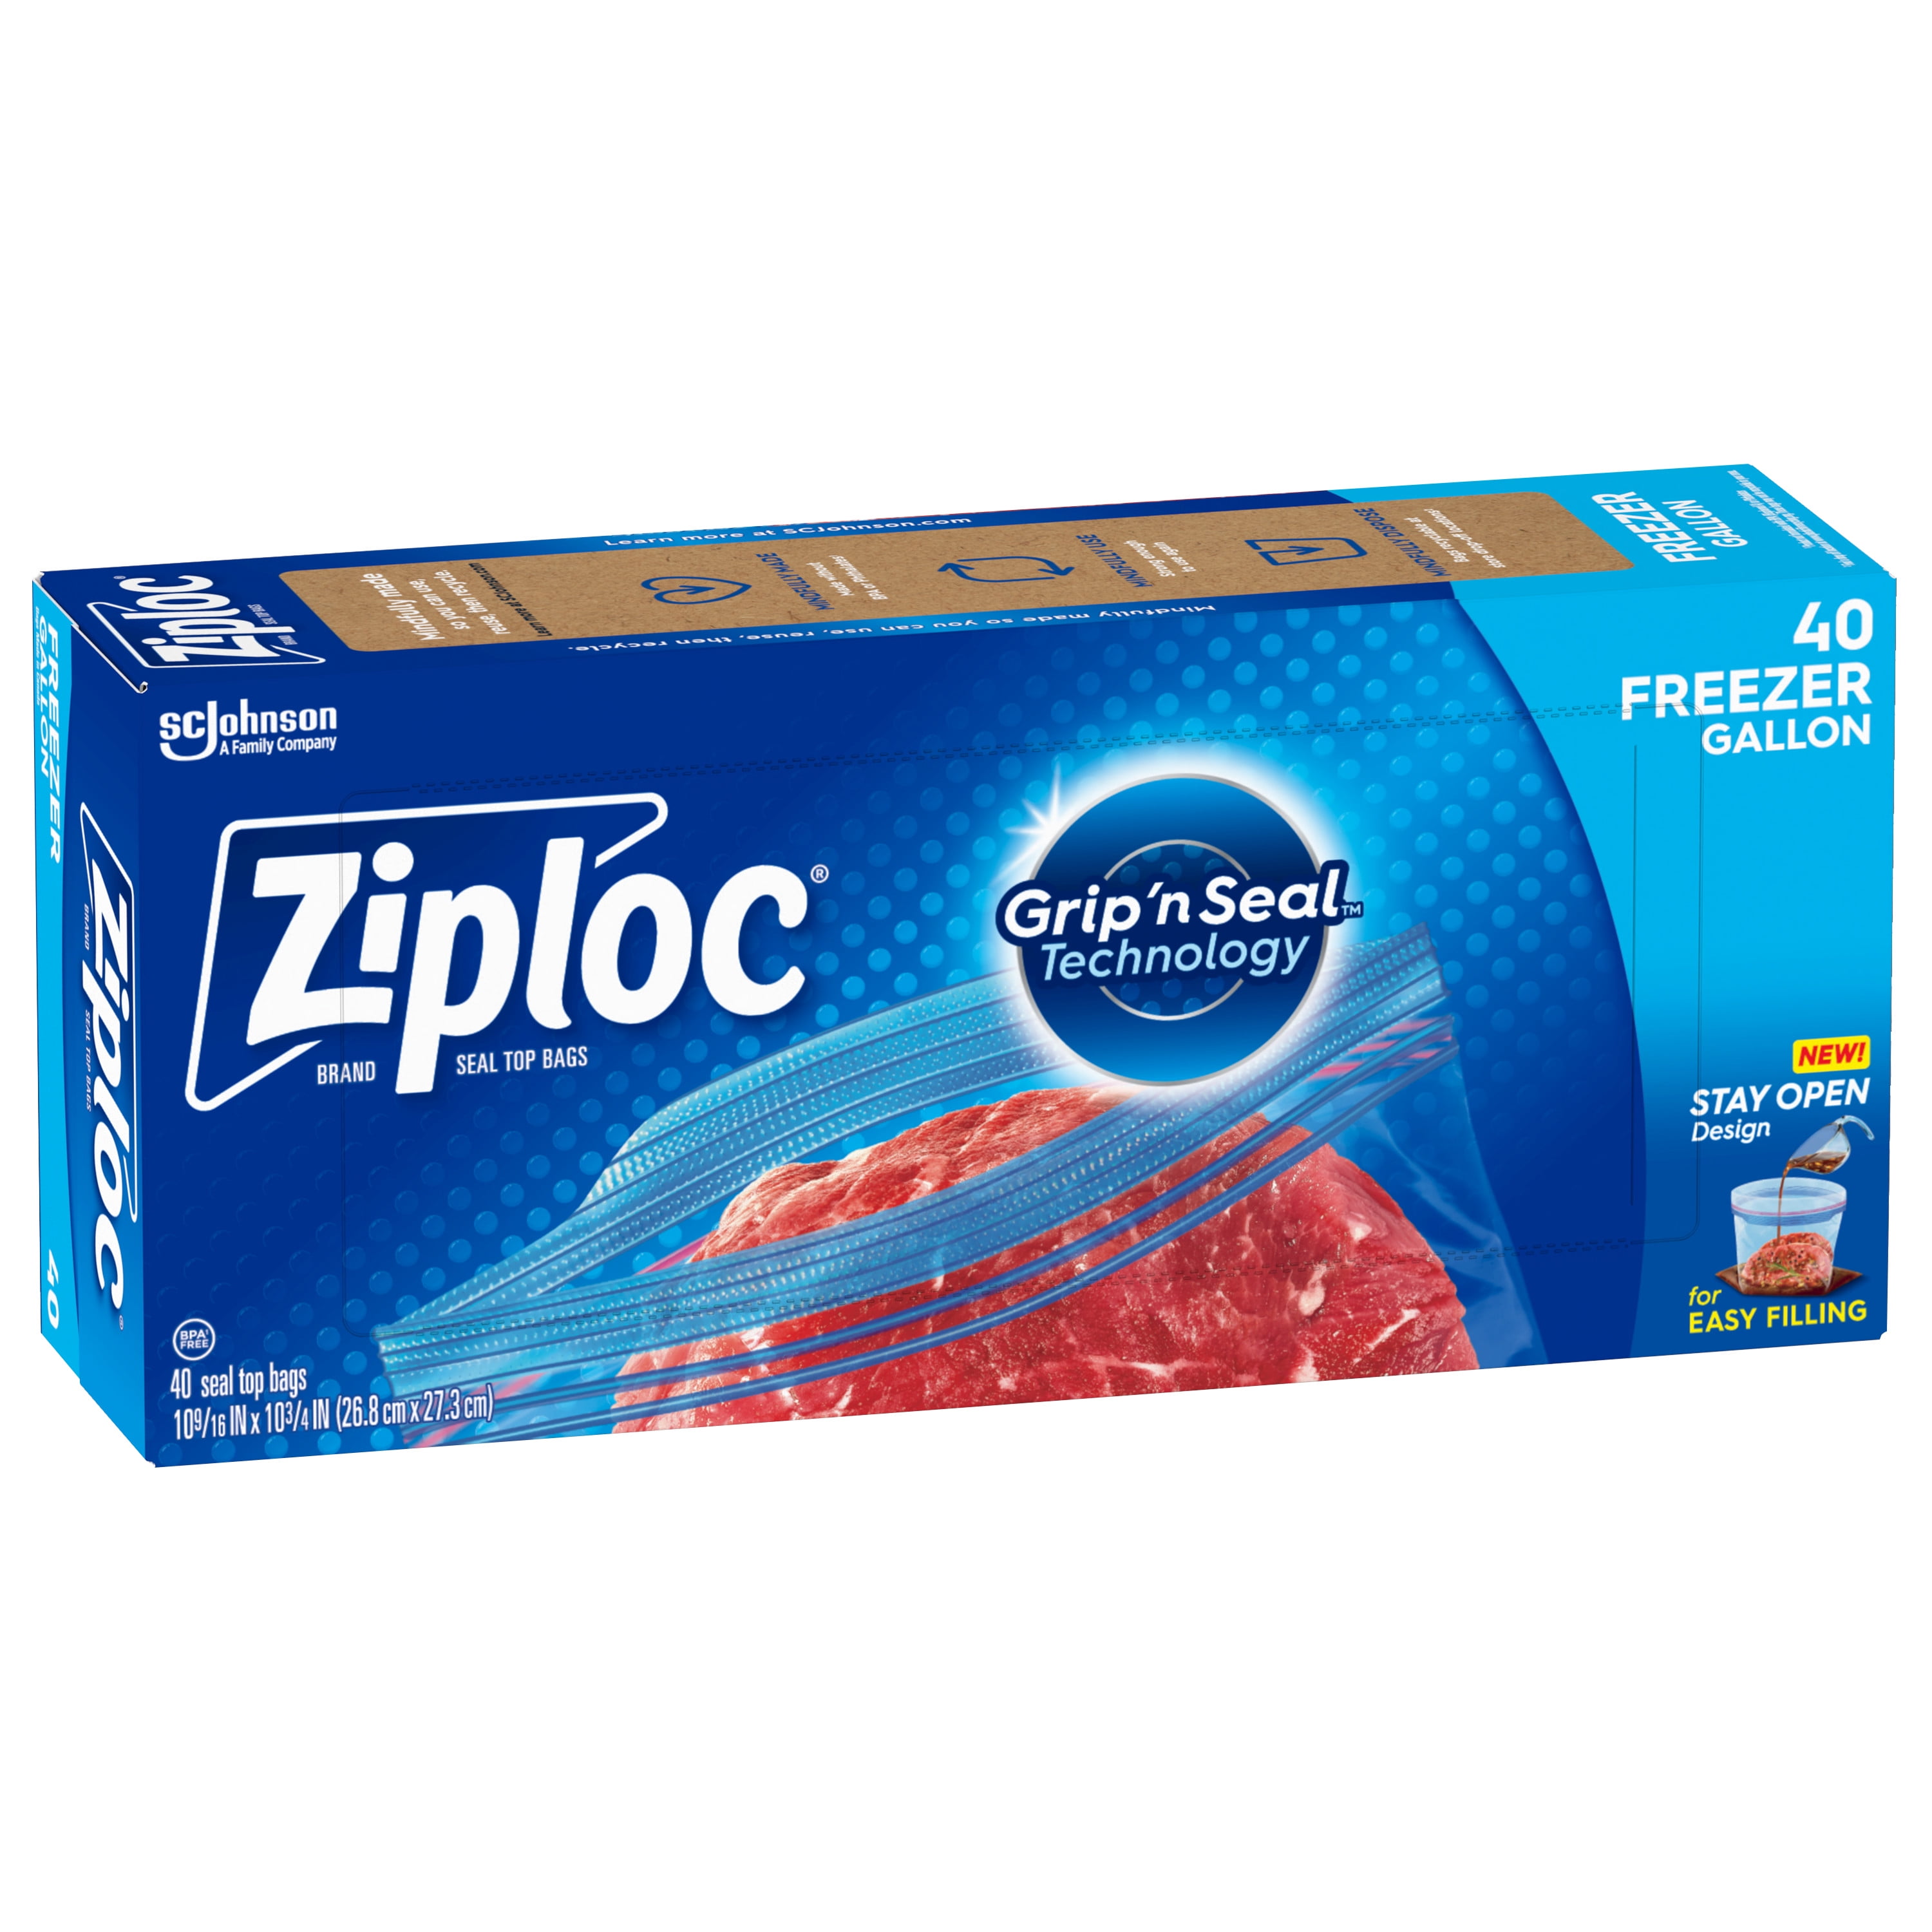  Ziploc Gallon Food Storage Freezer Bags, New Stay Open Design  with Stand-Up Bottom, Easy to Fill, 60 Count : Health & Household